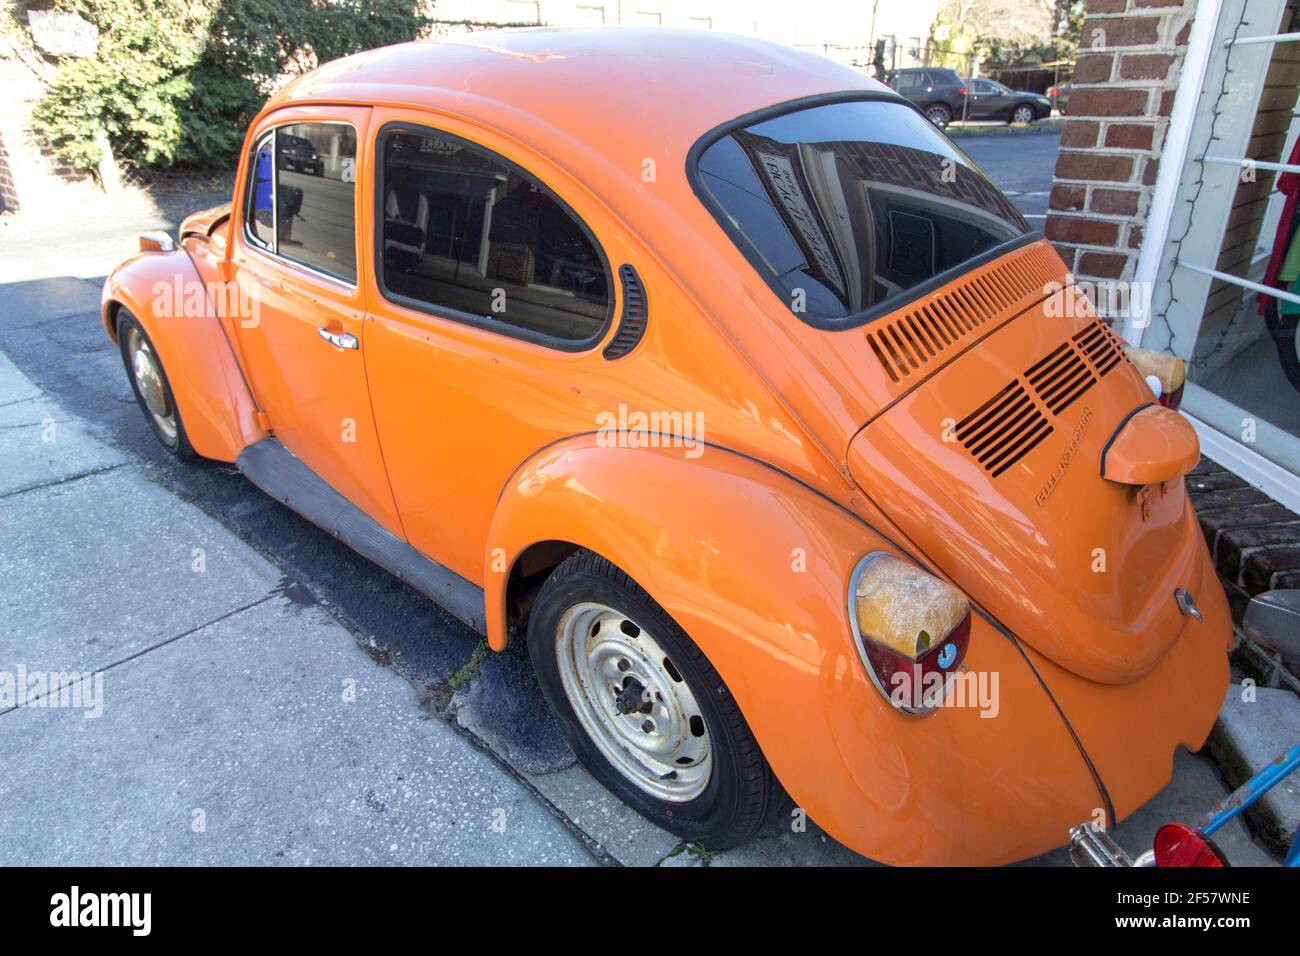 Profile view of a classic 1970s era Volkswagen Beetle. The car is now considered a collectors item and popular with auto enthusiasts. Stock Photo